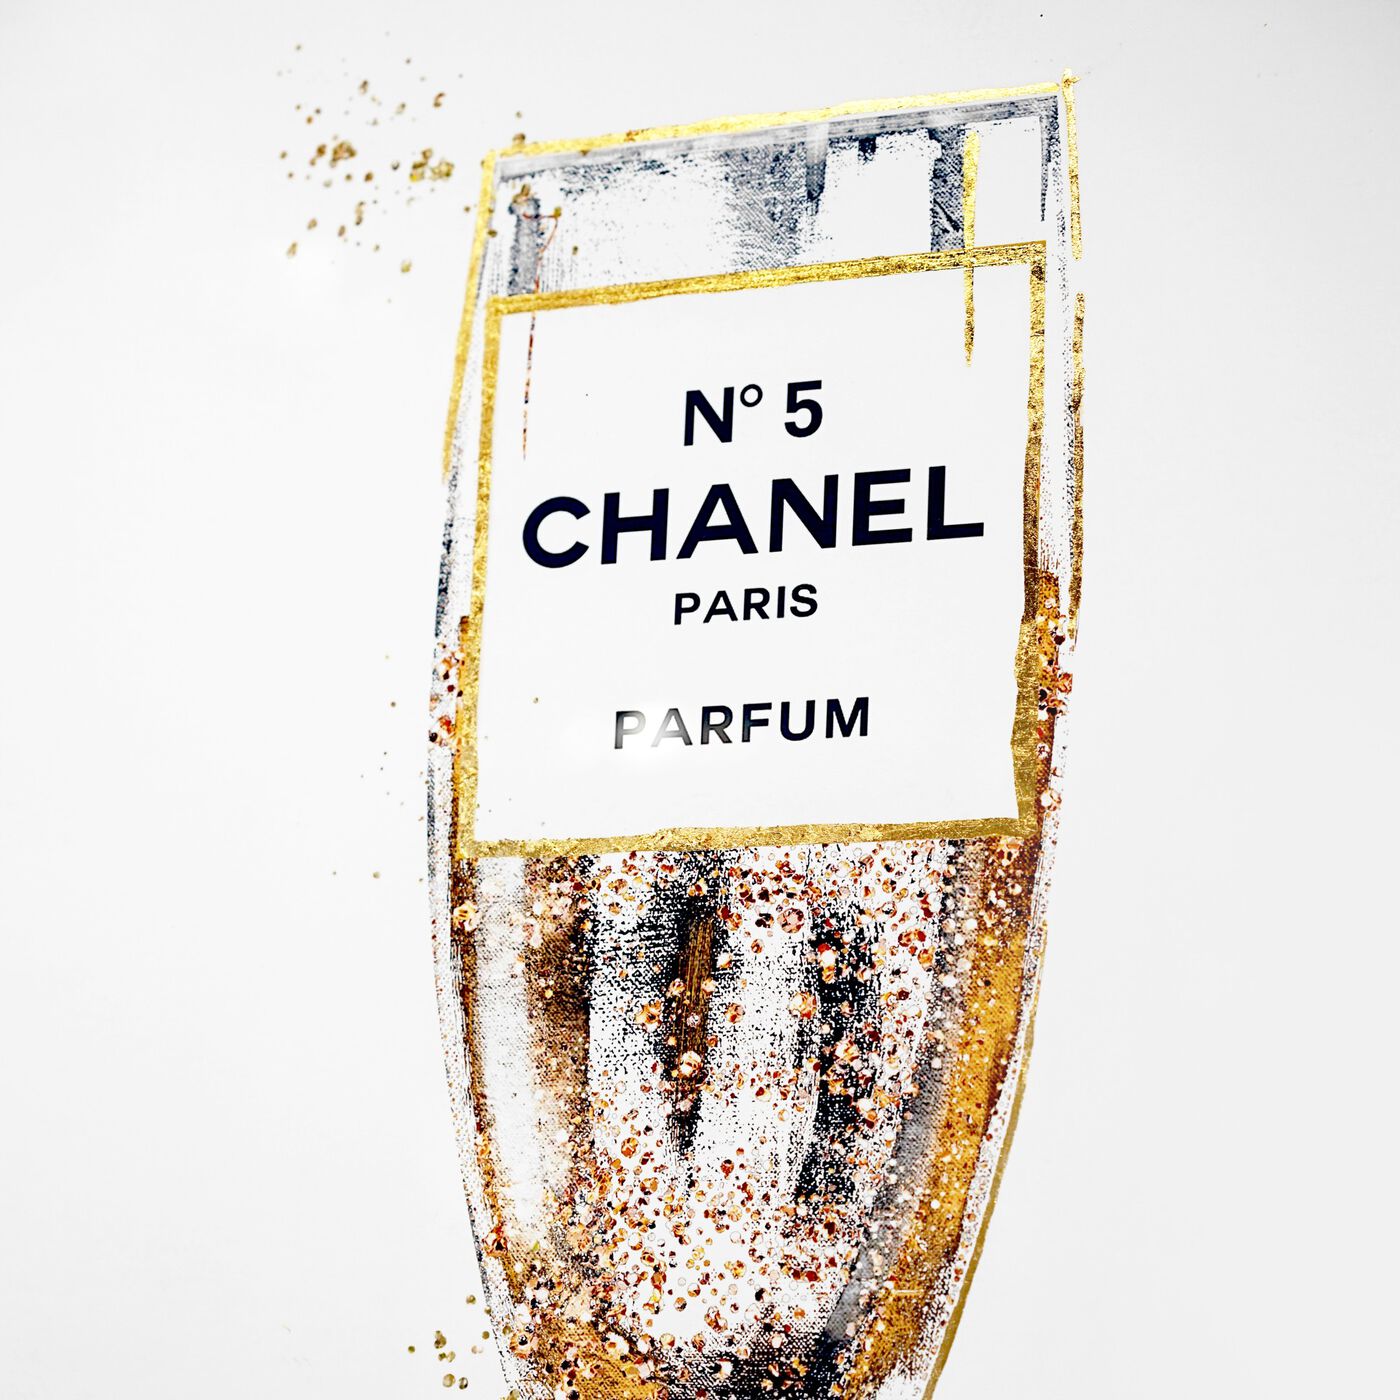 Glam Bubbly Champagne Perfume White  Fashion and Glam Wall Art by Oliver  Gal